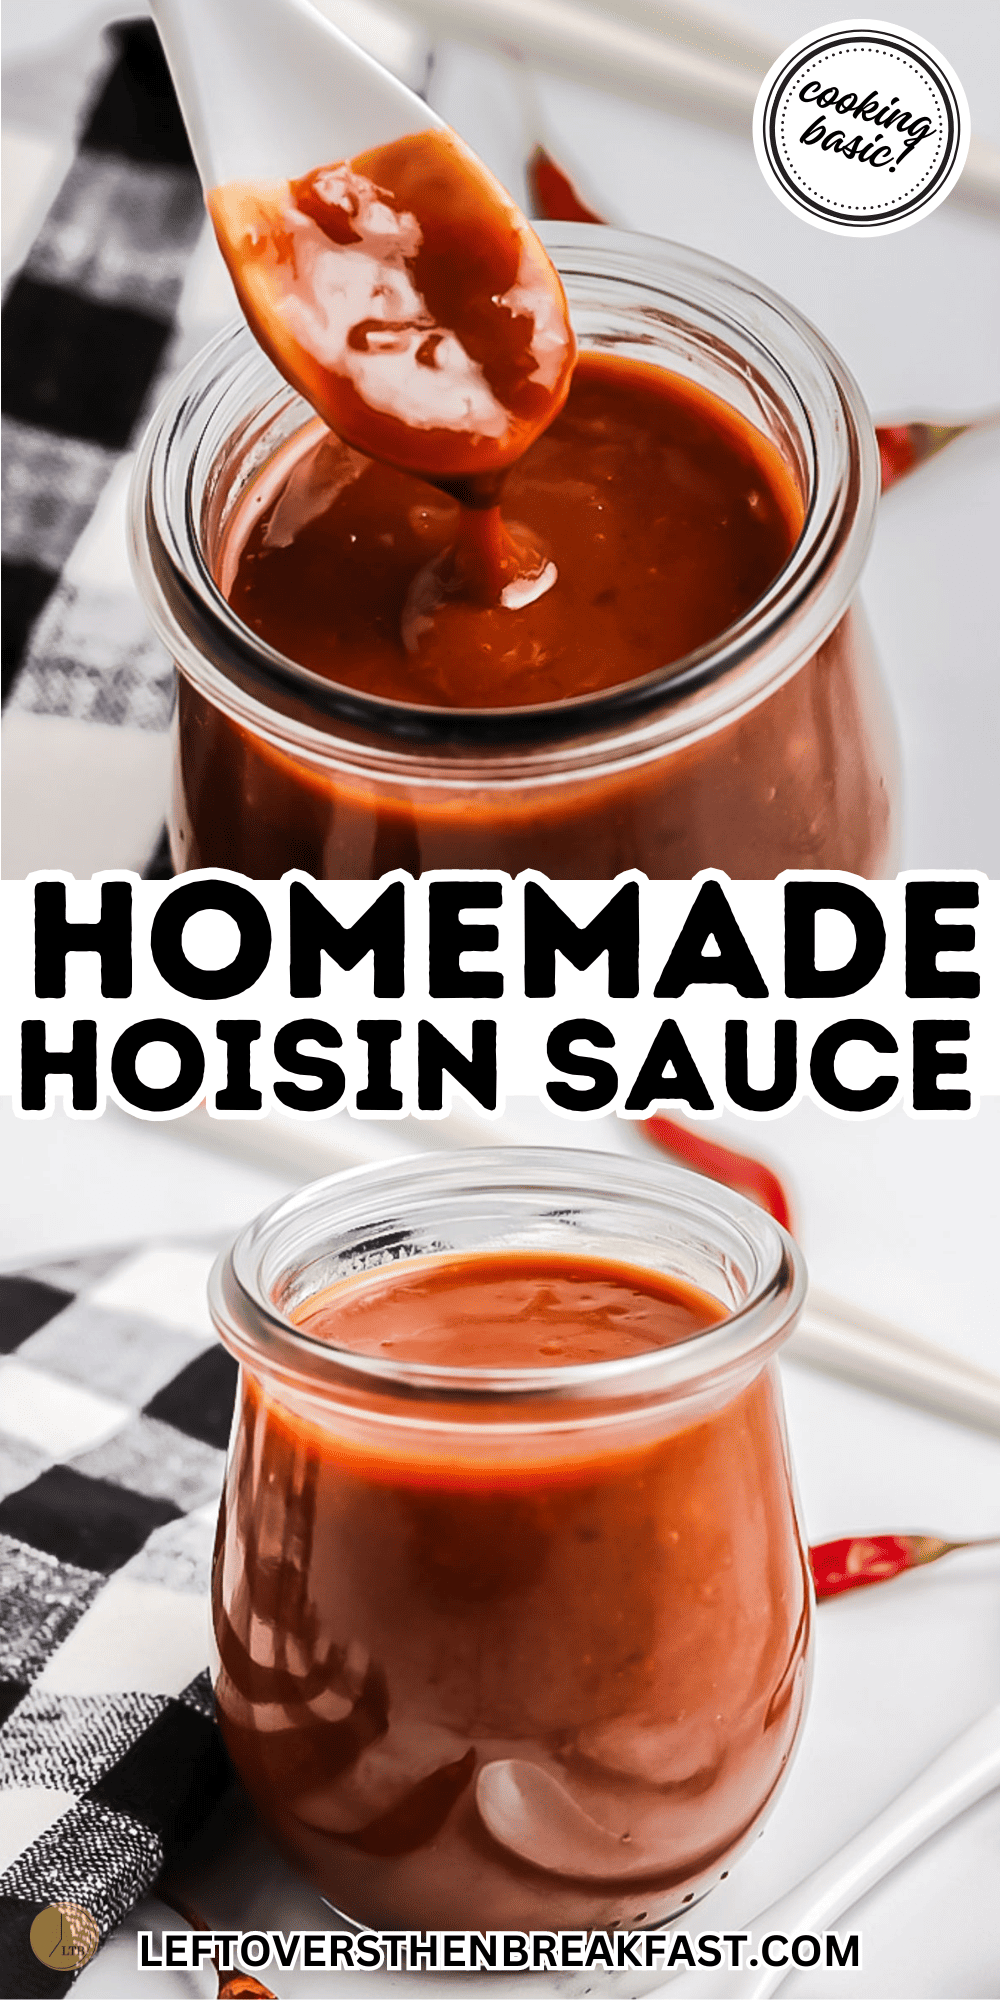 homemade hoisin sauce is better than what you get at the store and cheaper to make